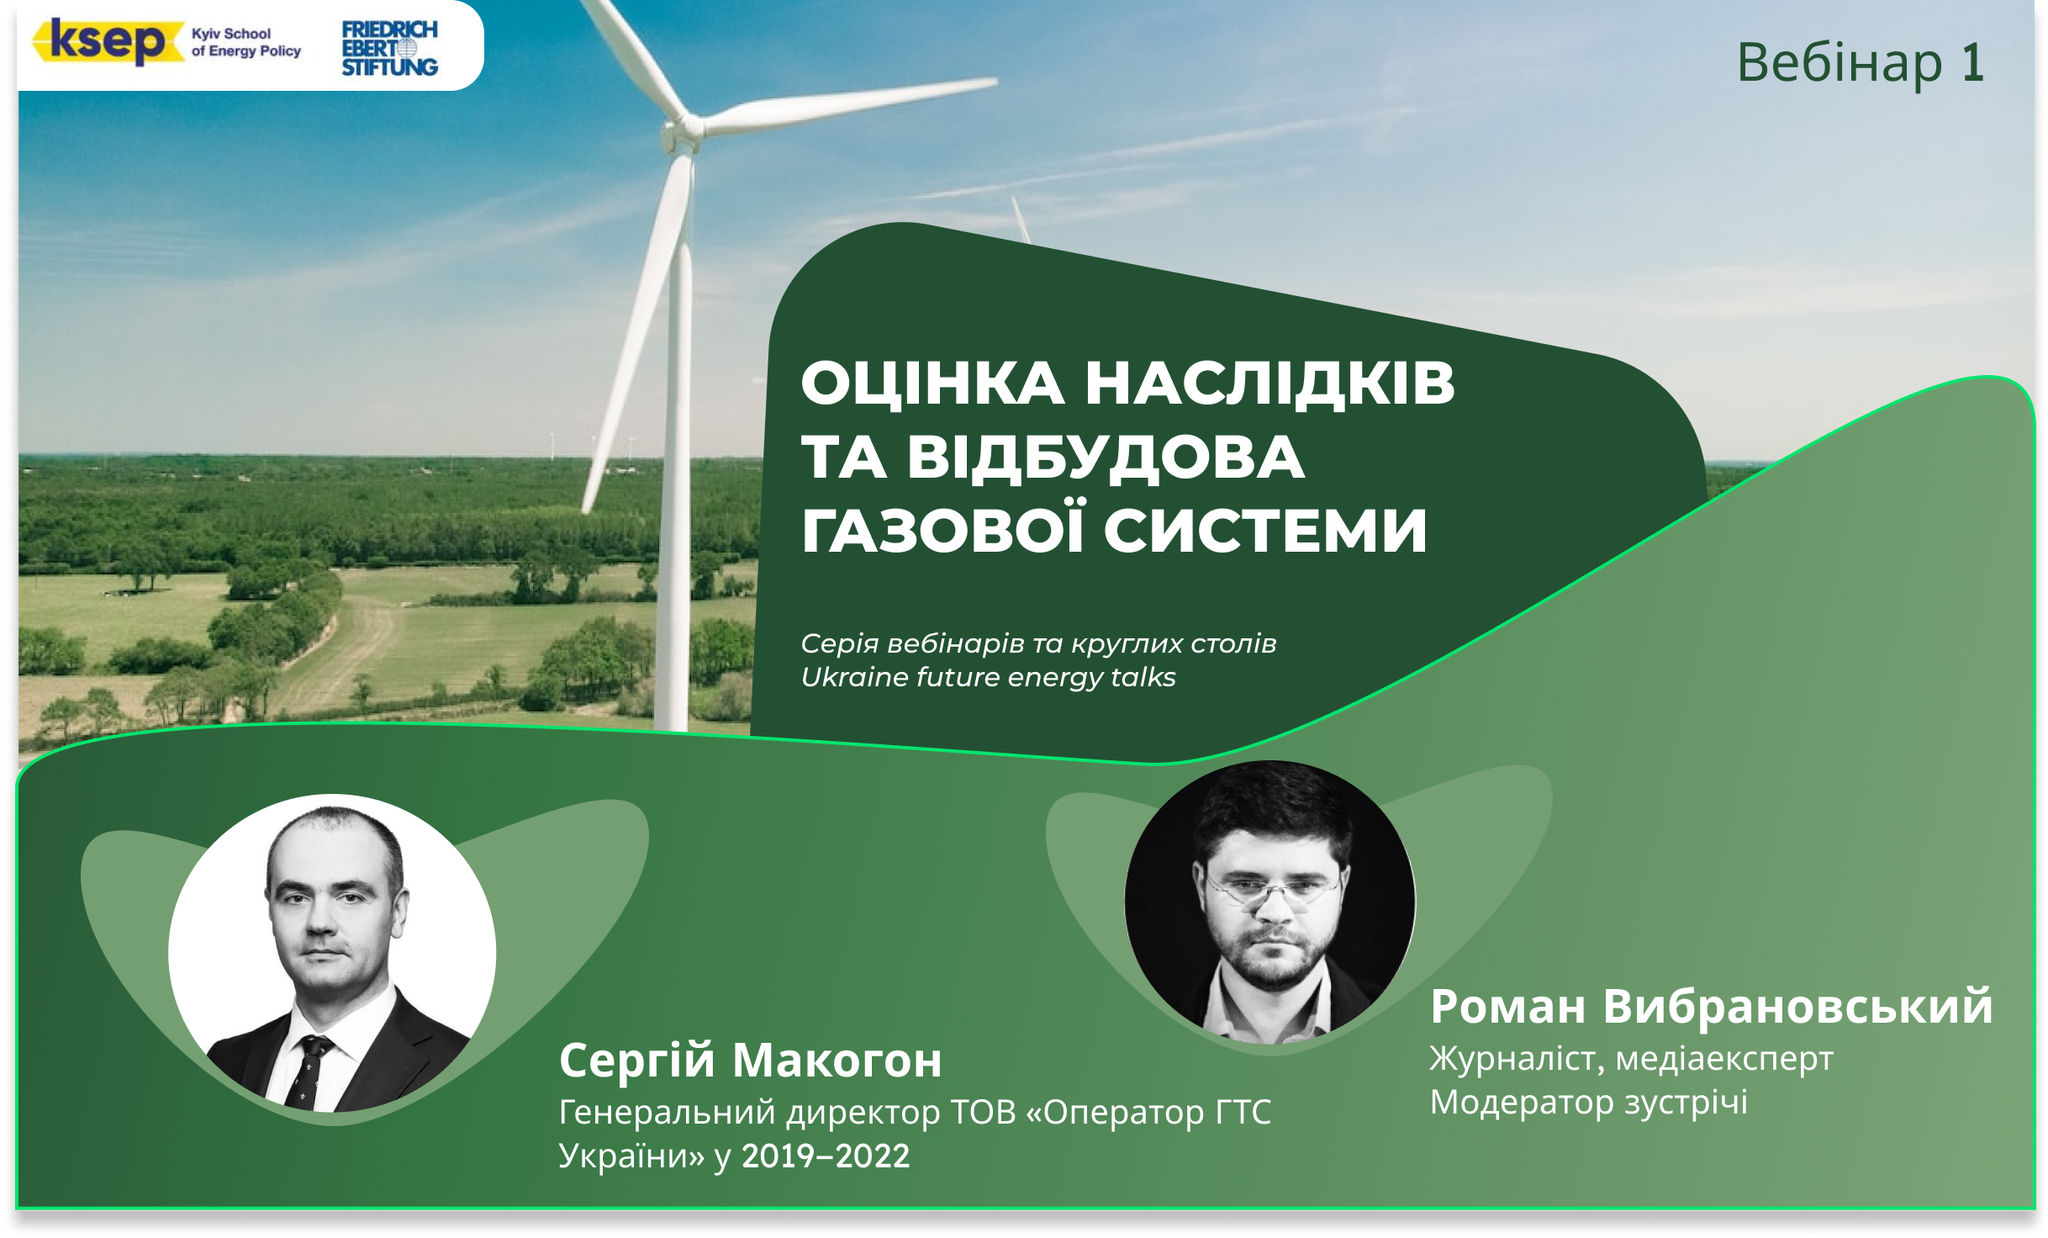 Serhiy Makogon: We need to modernize our gas transmission system 